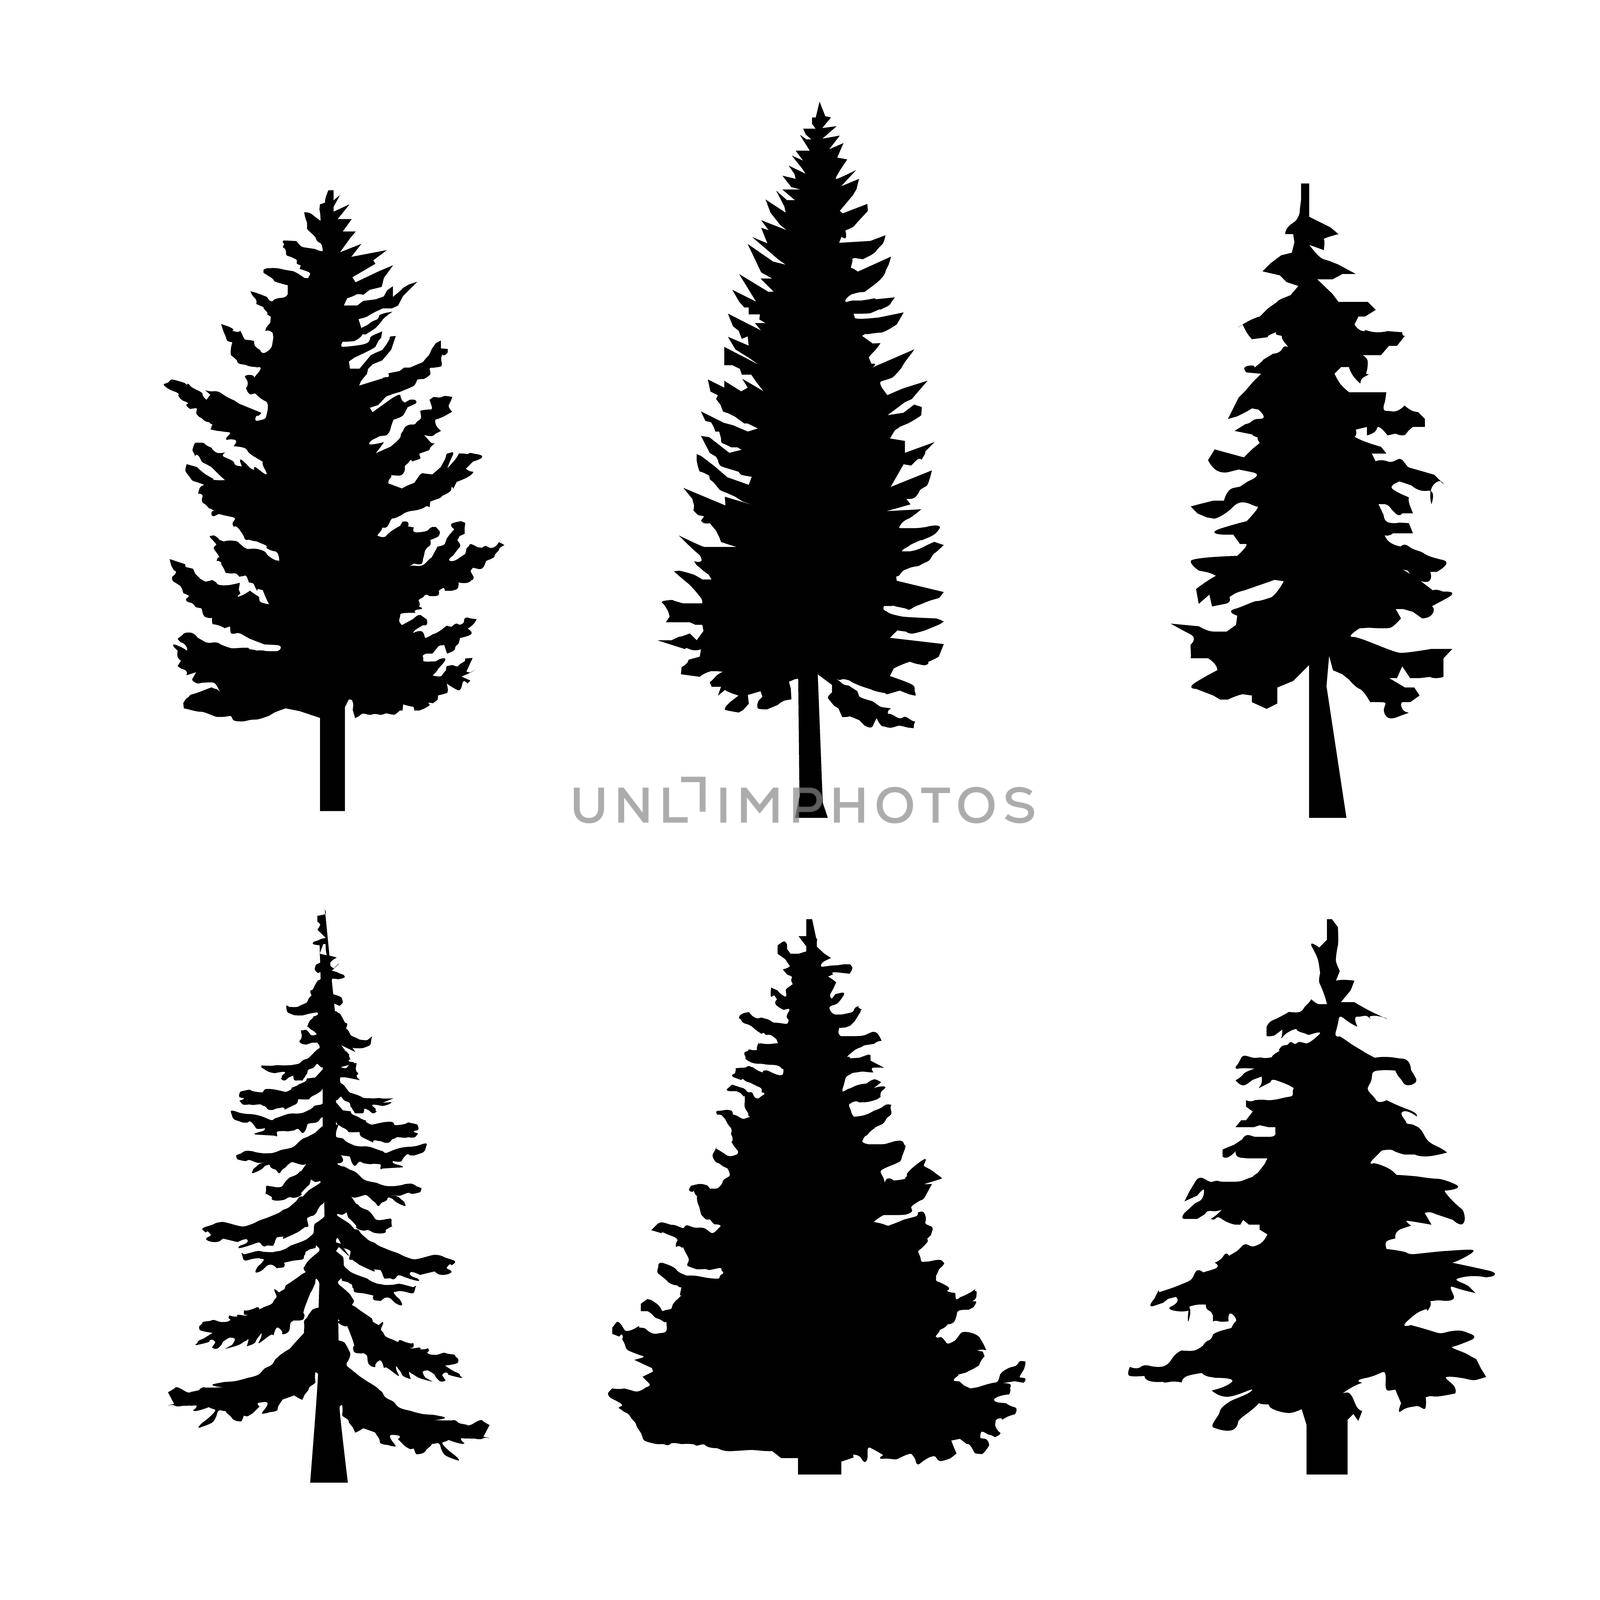 Set of Black Silhouettes of Pine Trees on White Background by Alxyzt